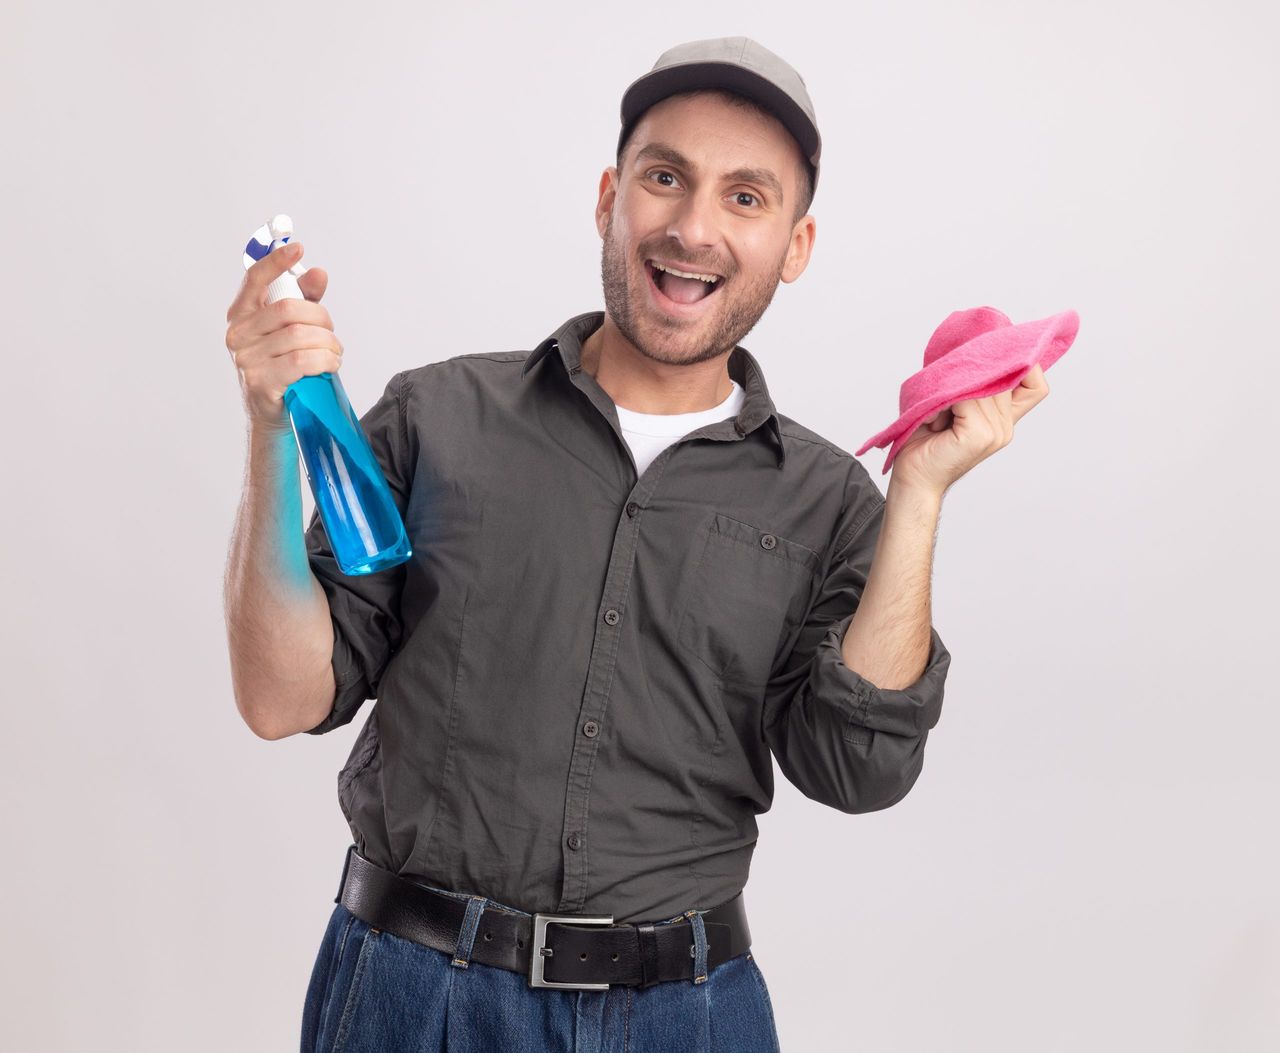 joyful young cleaning man wearing casual clothes and cap holding cleaning spray and rag looking at camera happy and excited standing over white background